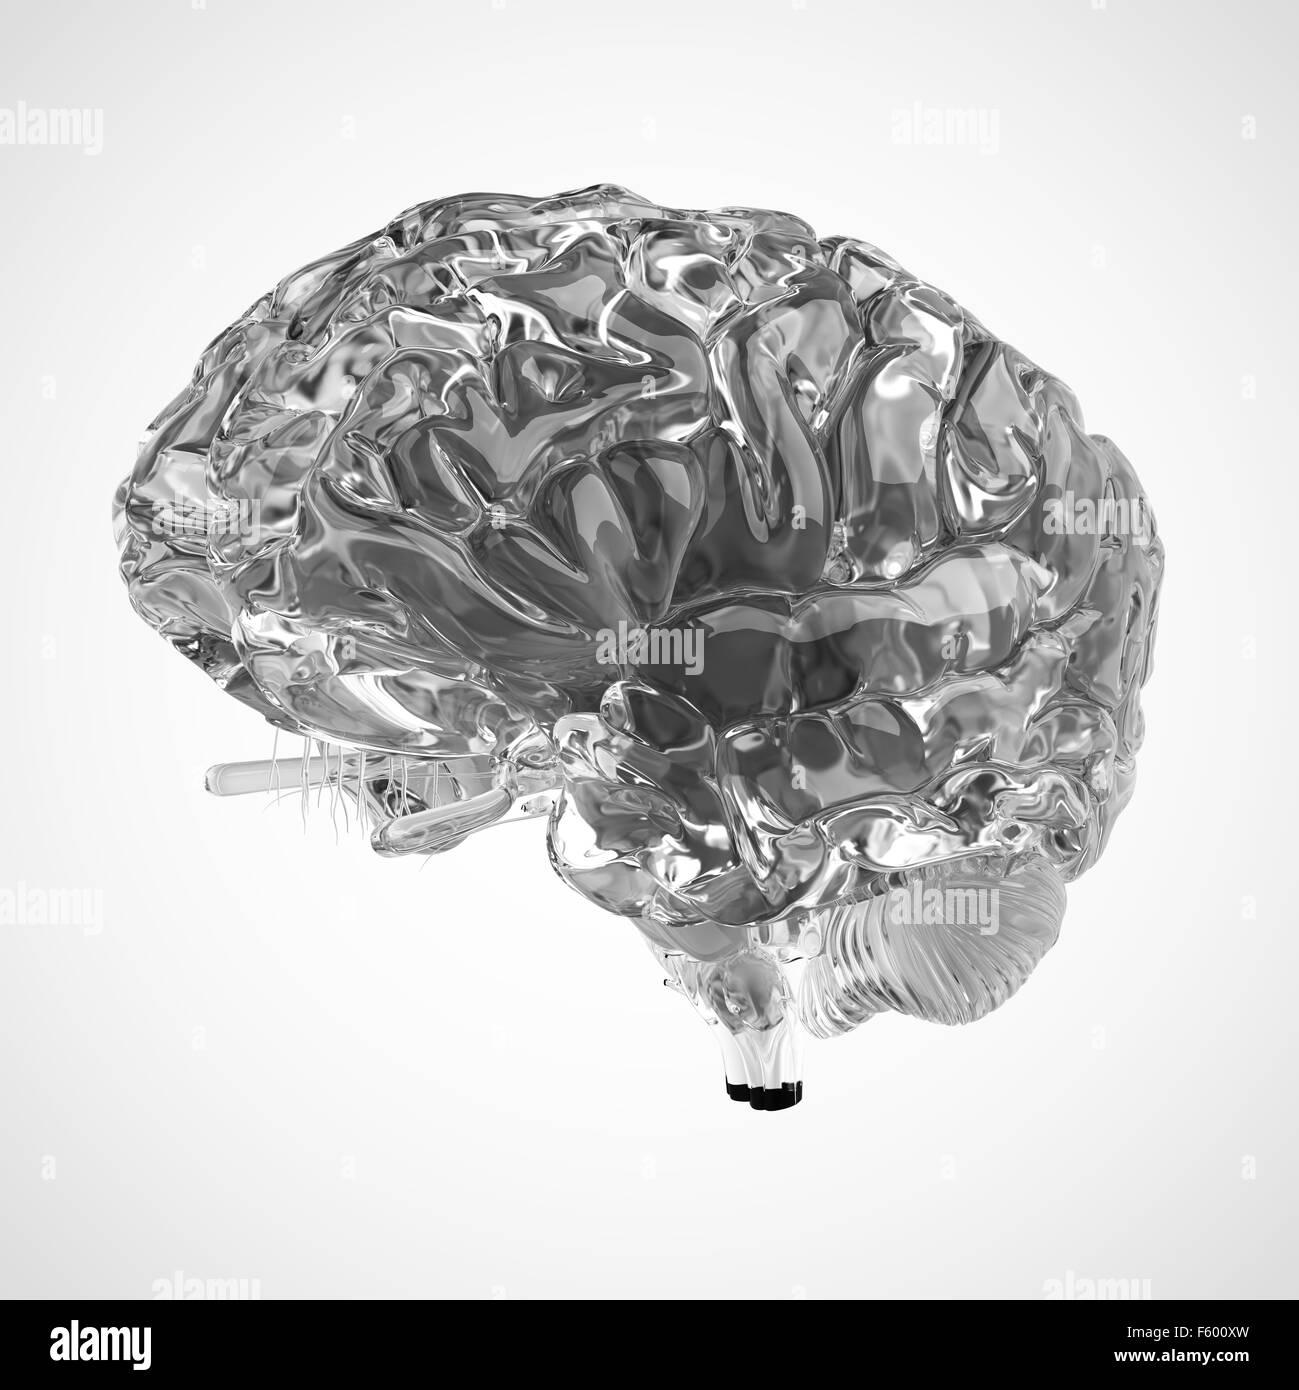 medically accurate illustration of a glas brain Stock Photo